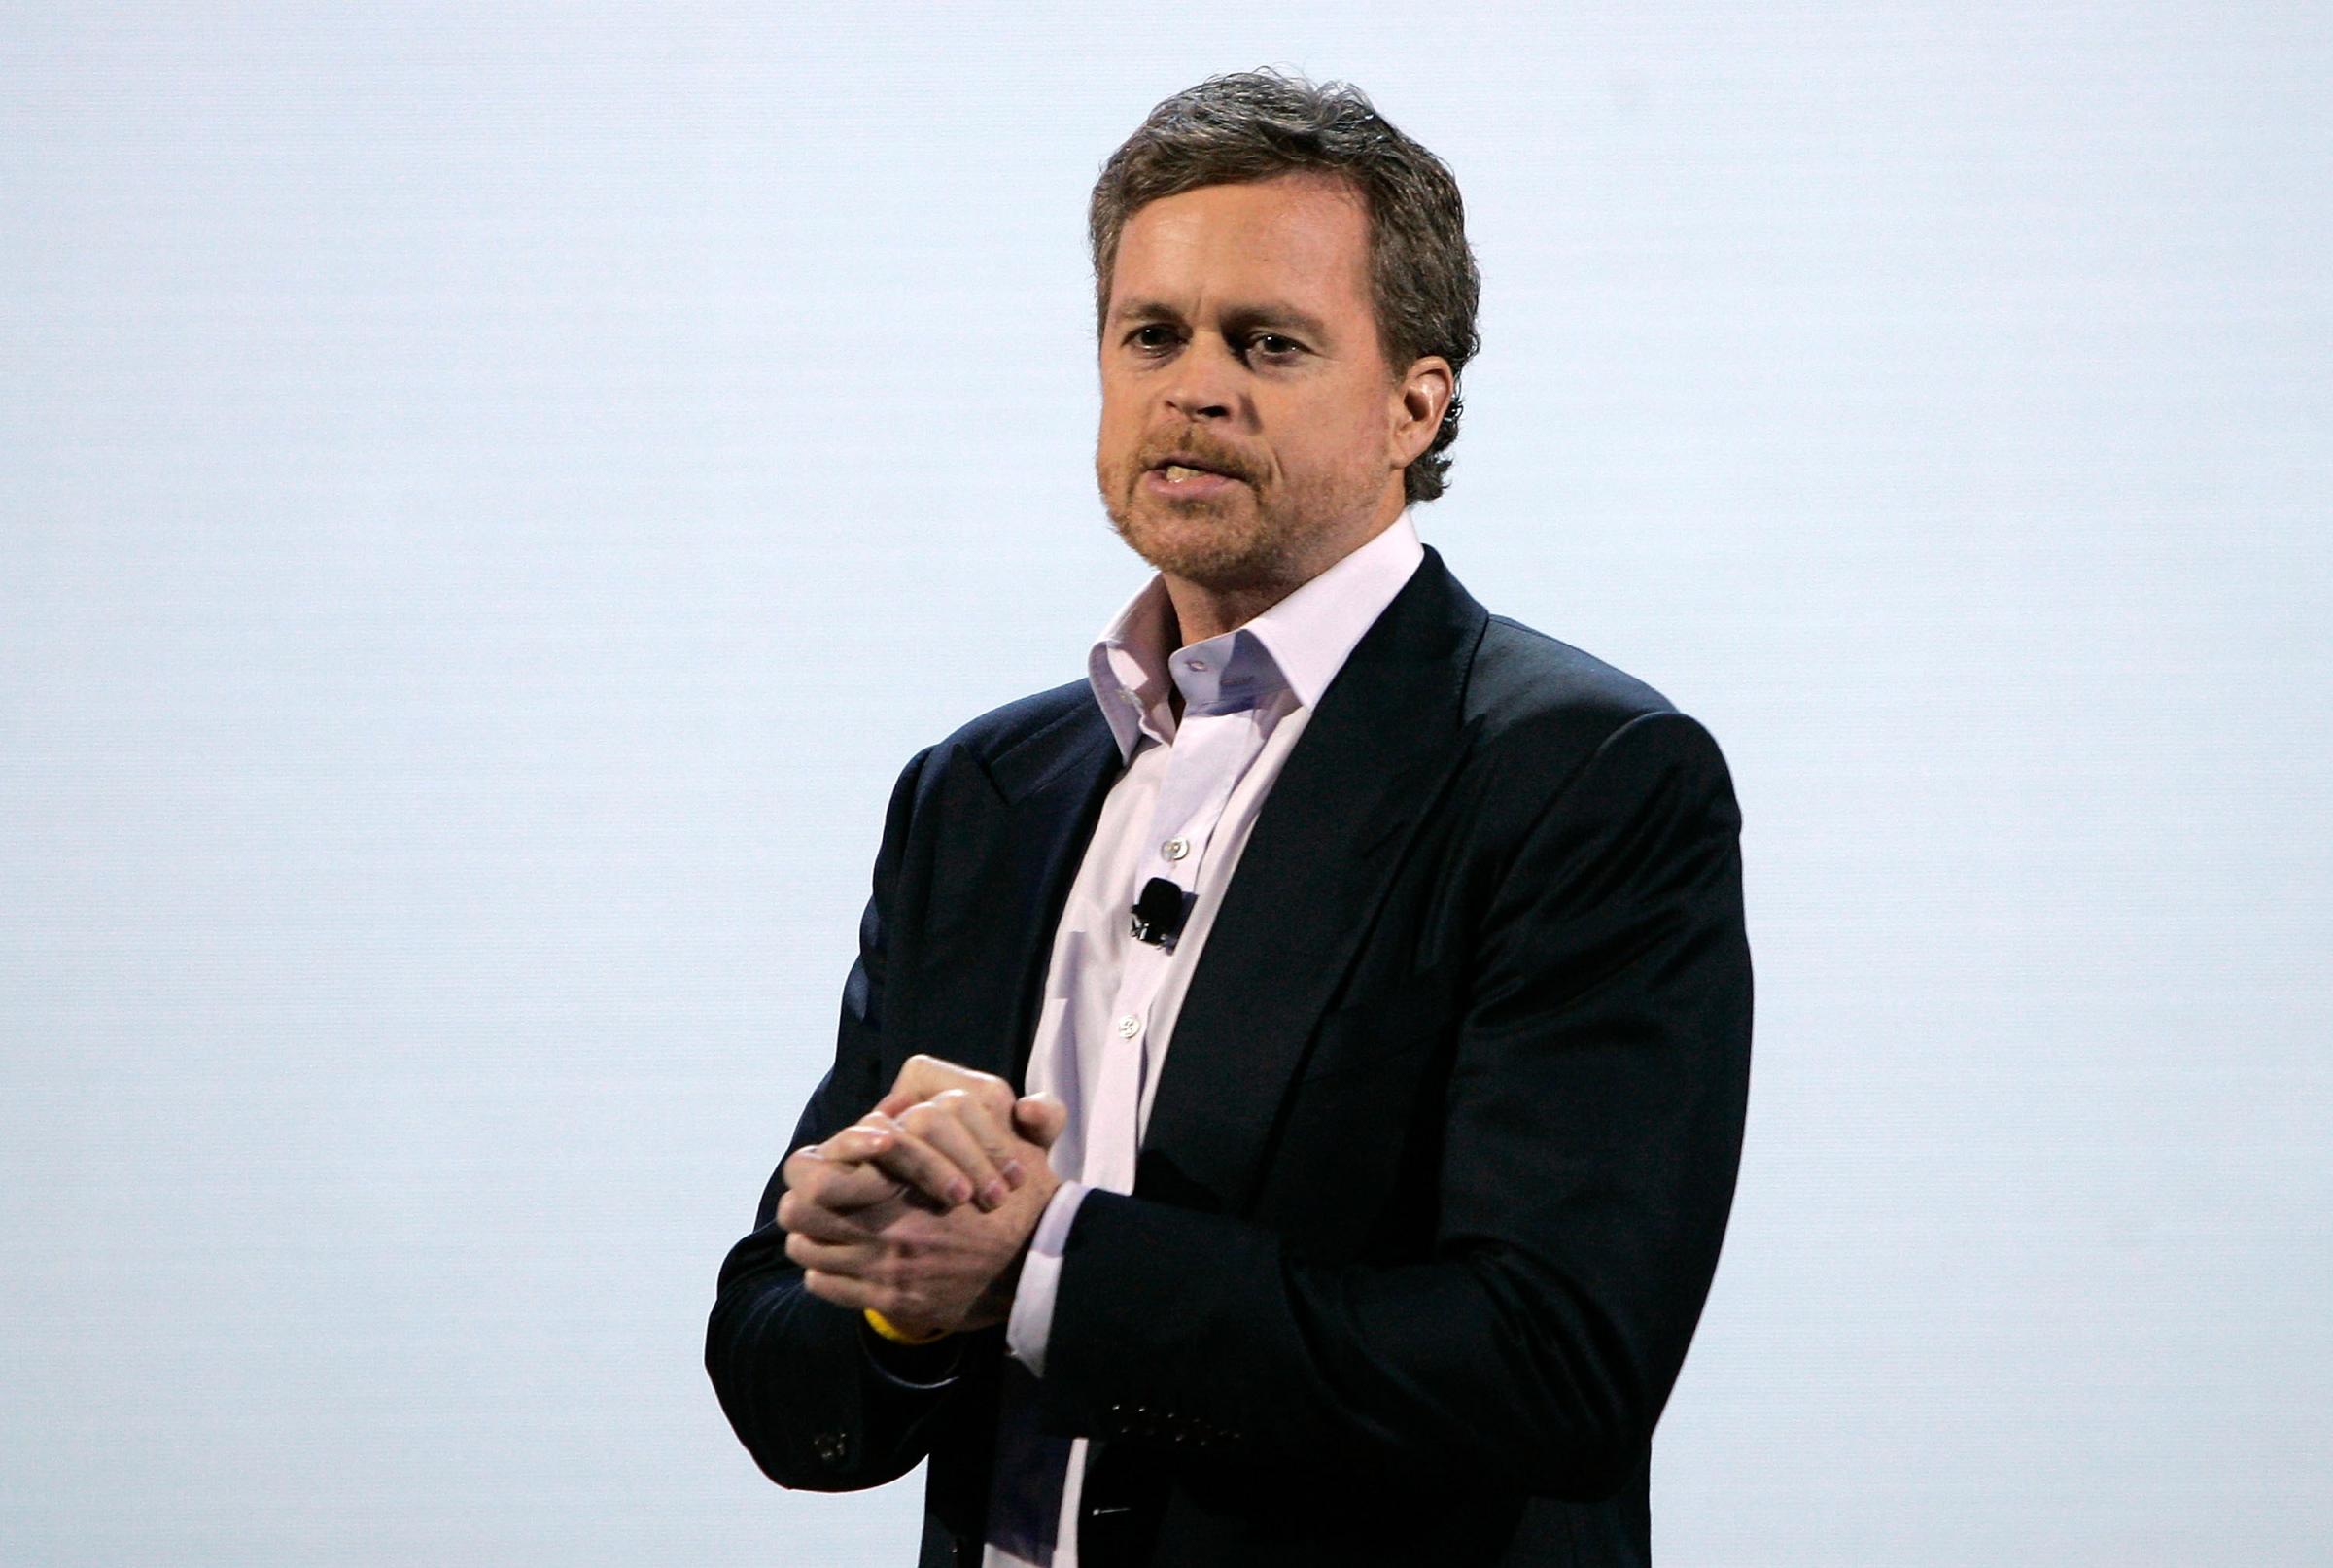 Mark Parker speaks as Nike introduces new basketball and training technology in New York City on Feb. 22, 2012.